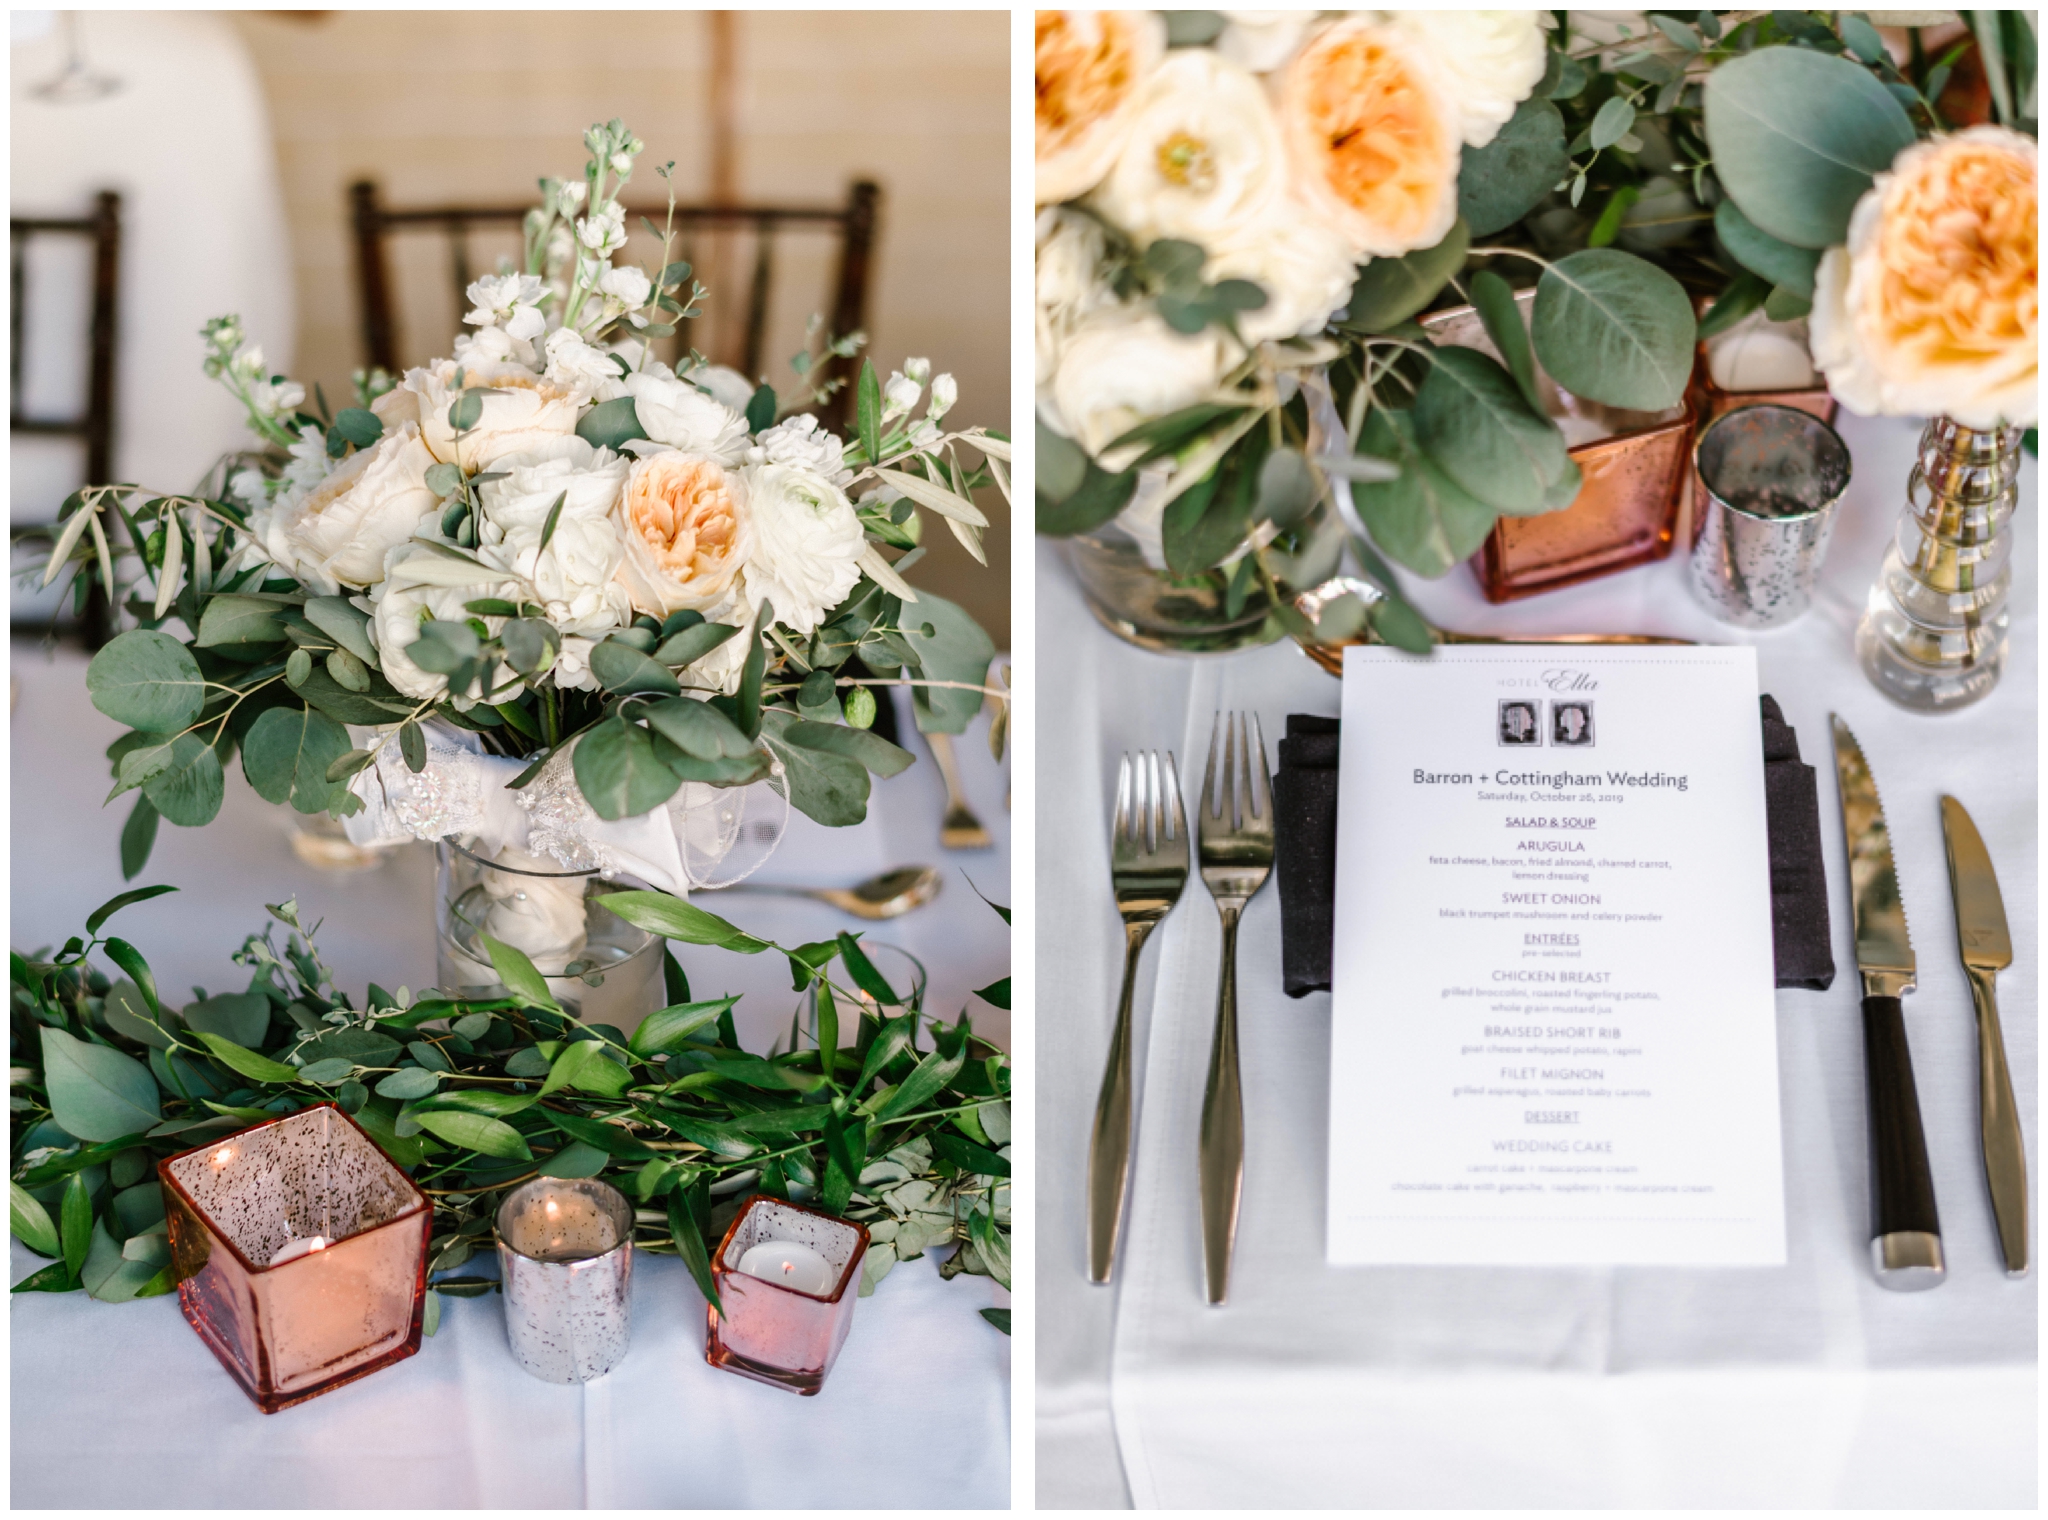 Emily and Ralph’s intimate wedding reception in Austin, Texas